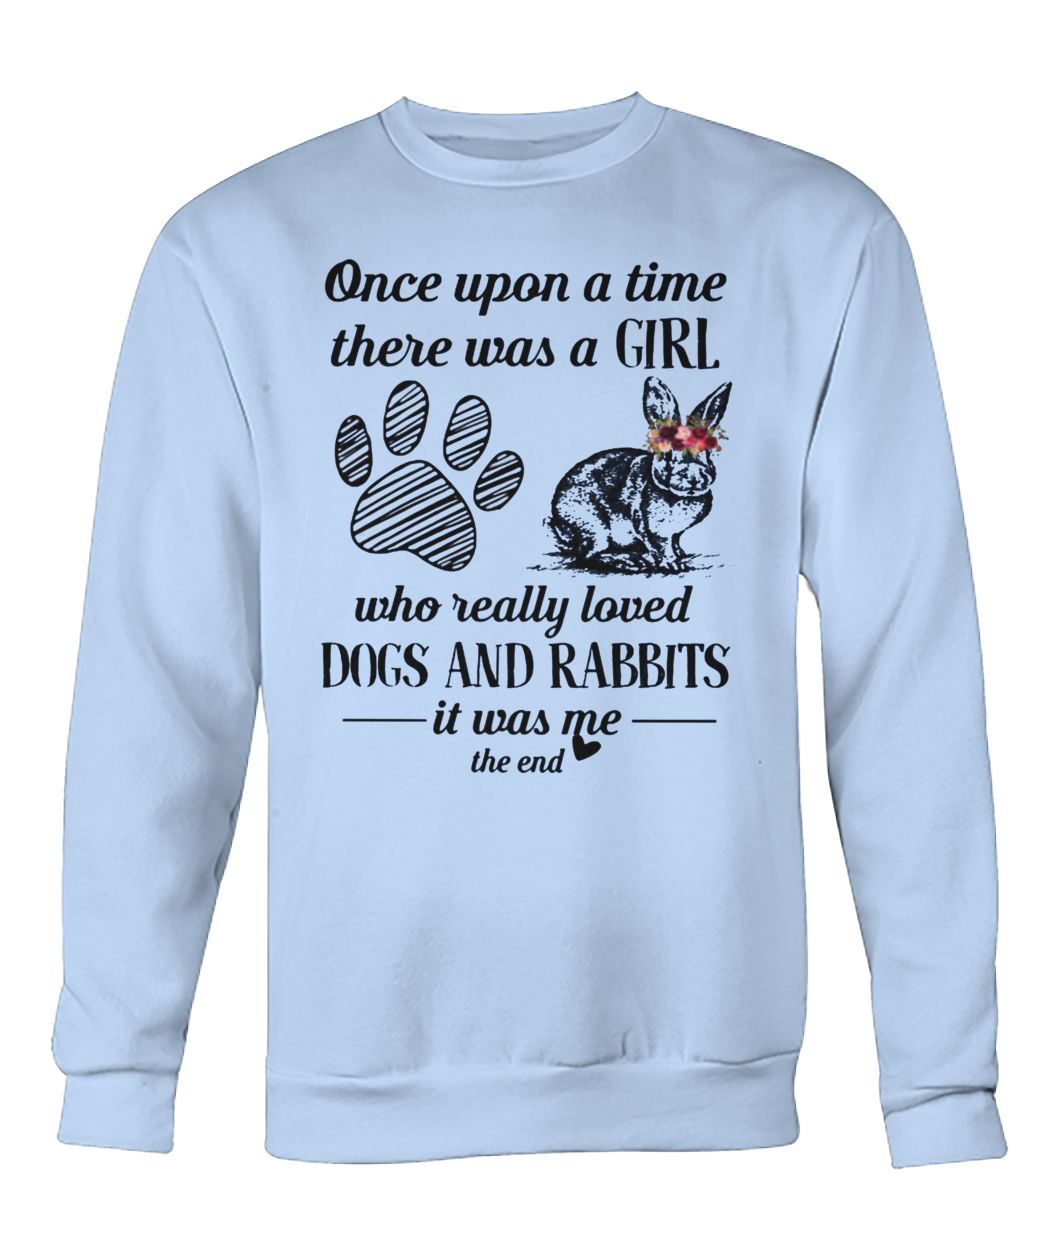 Once upon a time there was a girl who really loved dogs and rabbit it was me the end crew neck sweatshirt